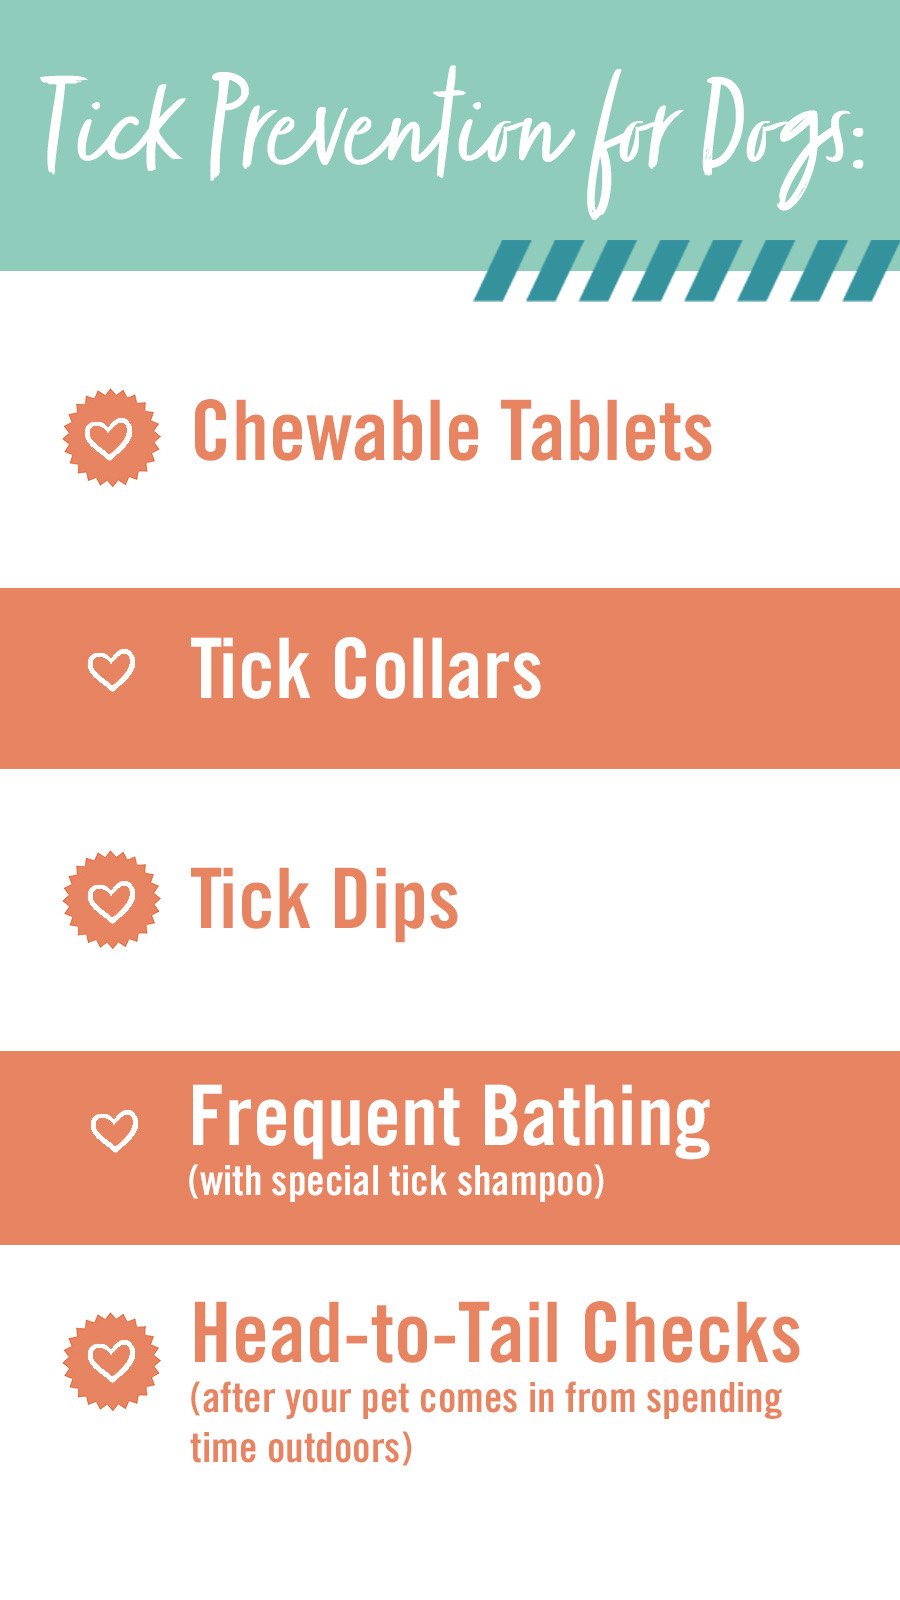 Tick Prevention for Dogs infographic